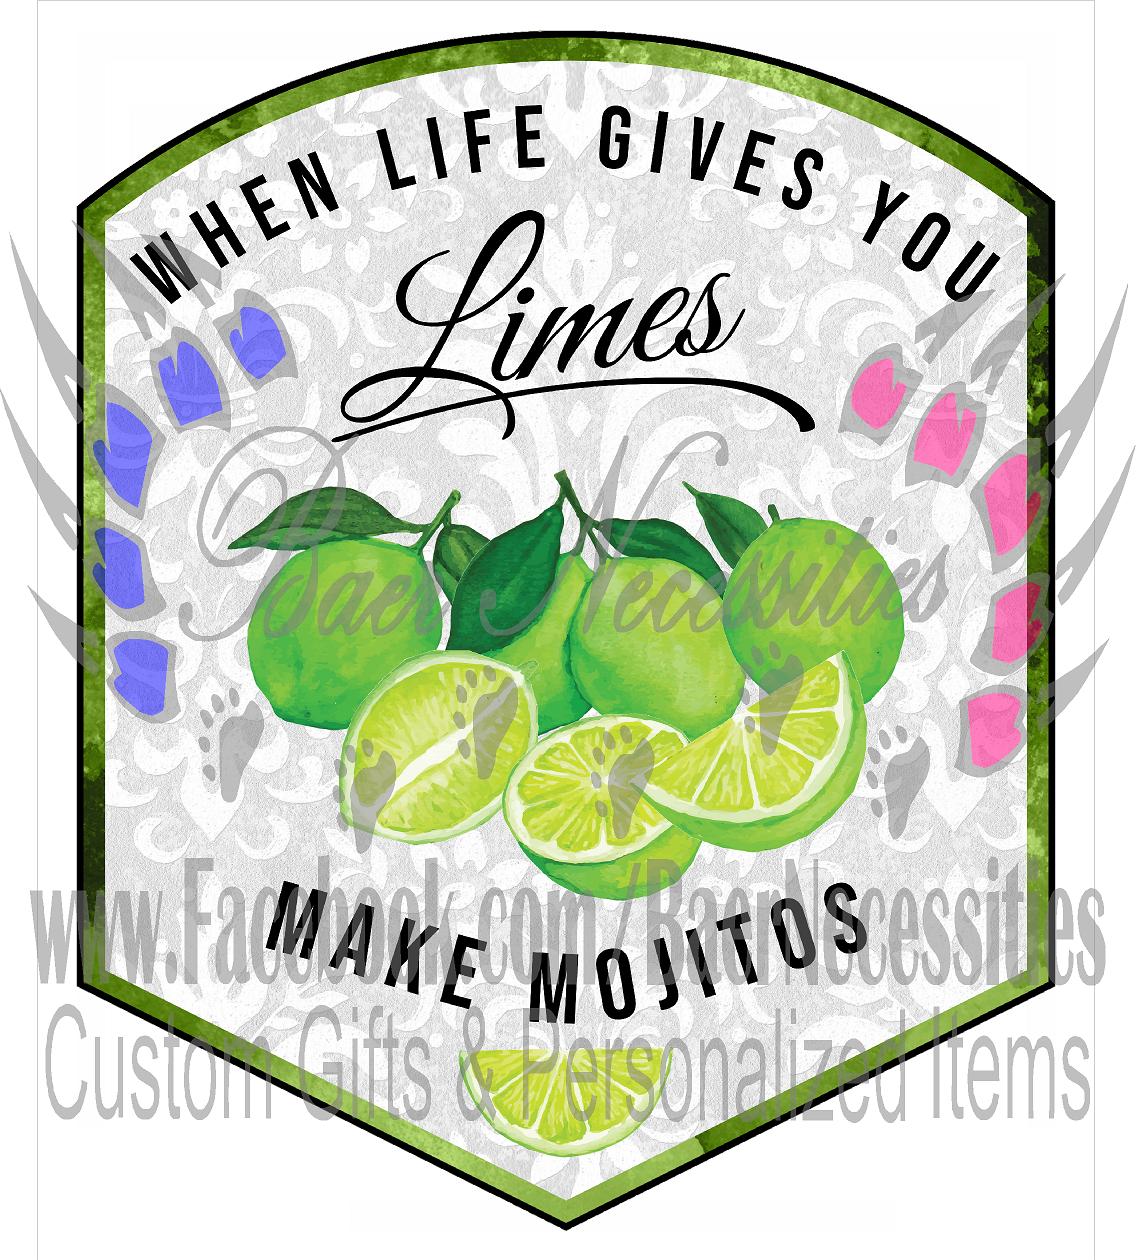 When Life Gives you Limes, Make Mojitos Label - Tumber decal